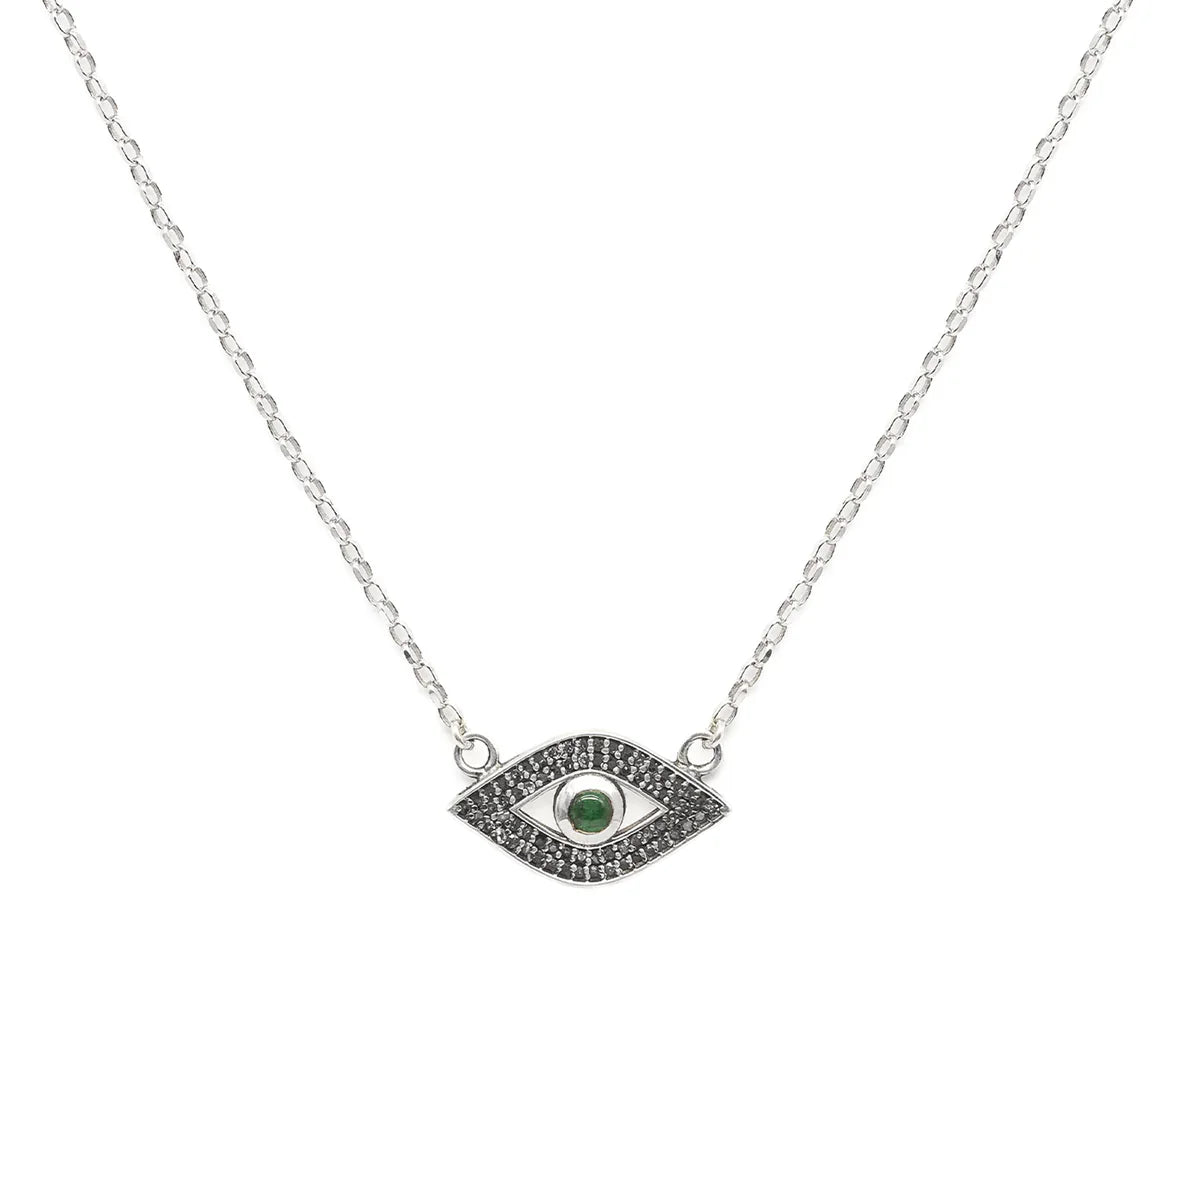 White gold emerald and pave diamond evil eye necklace